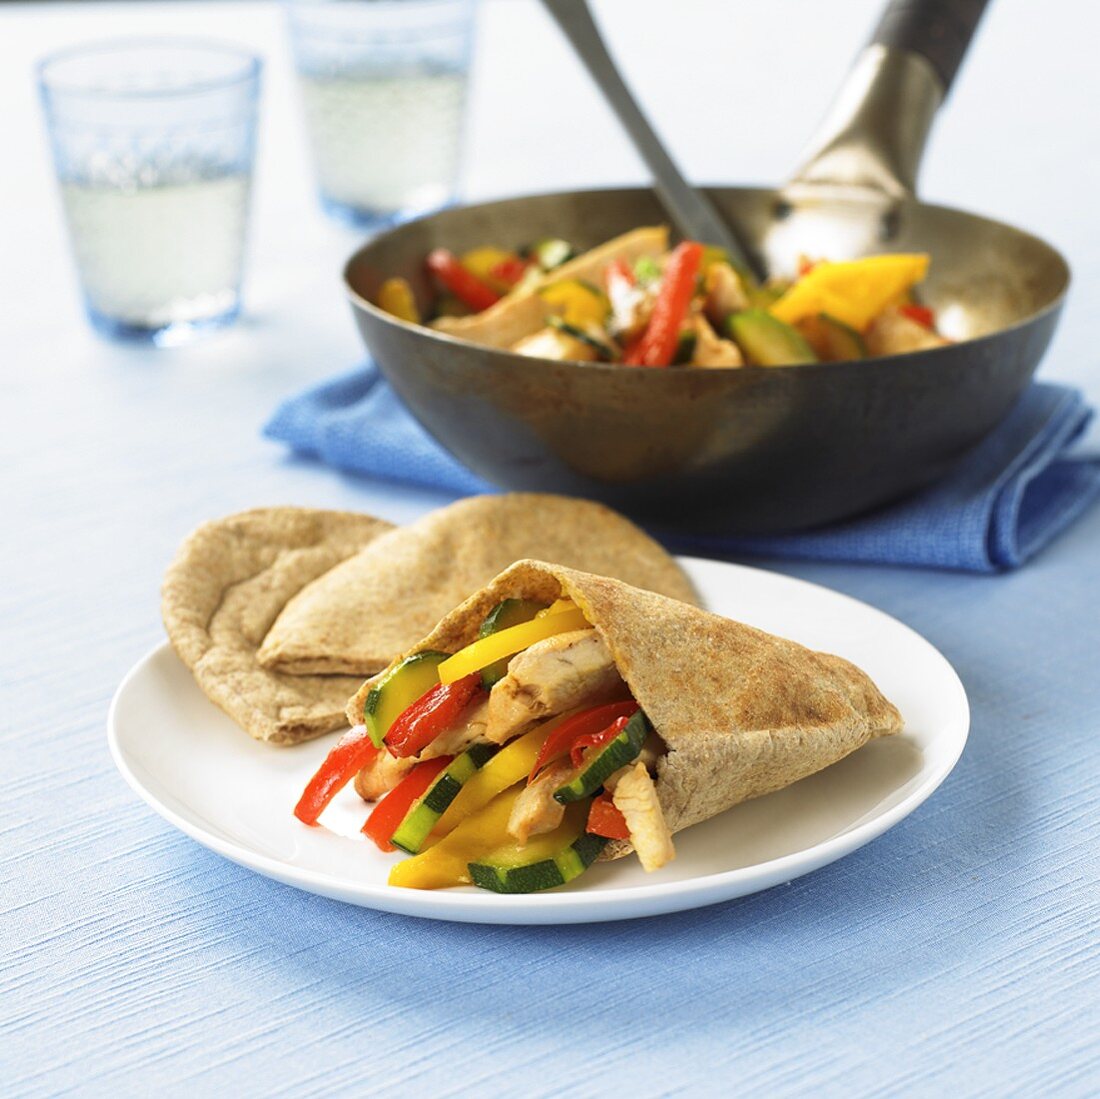 Pita bread filled with chicken and vegetables